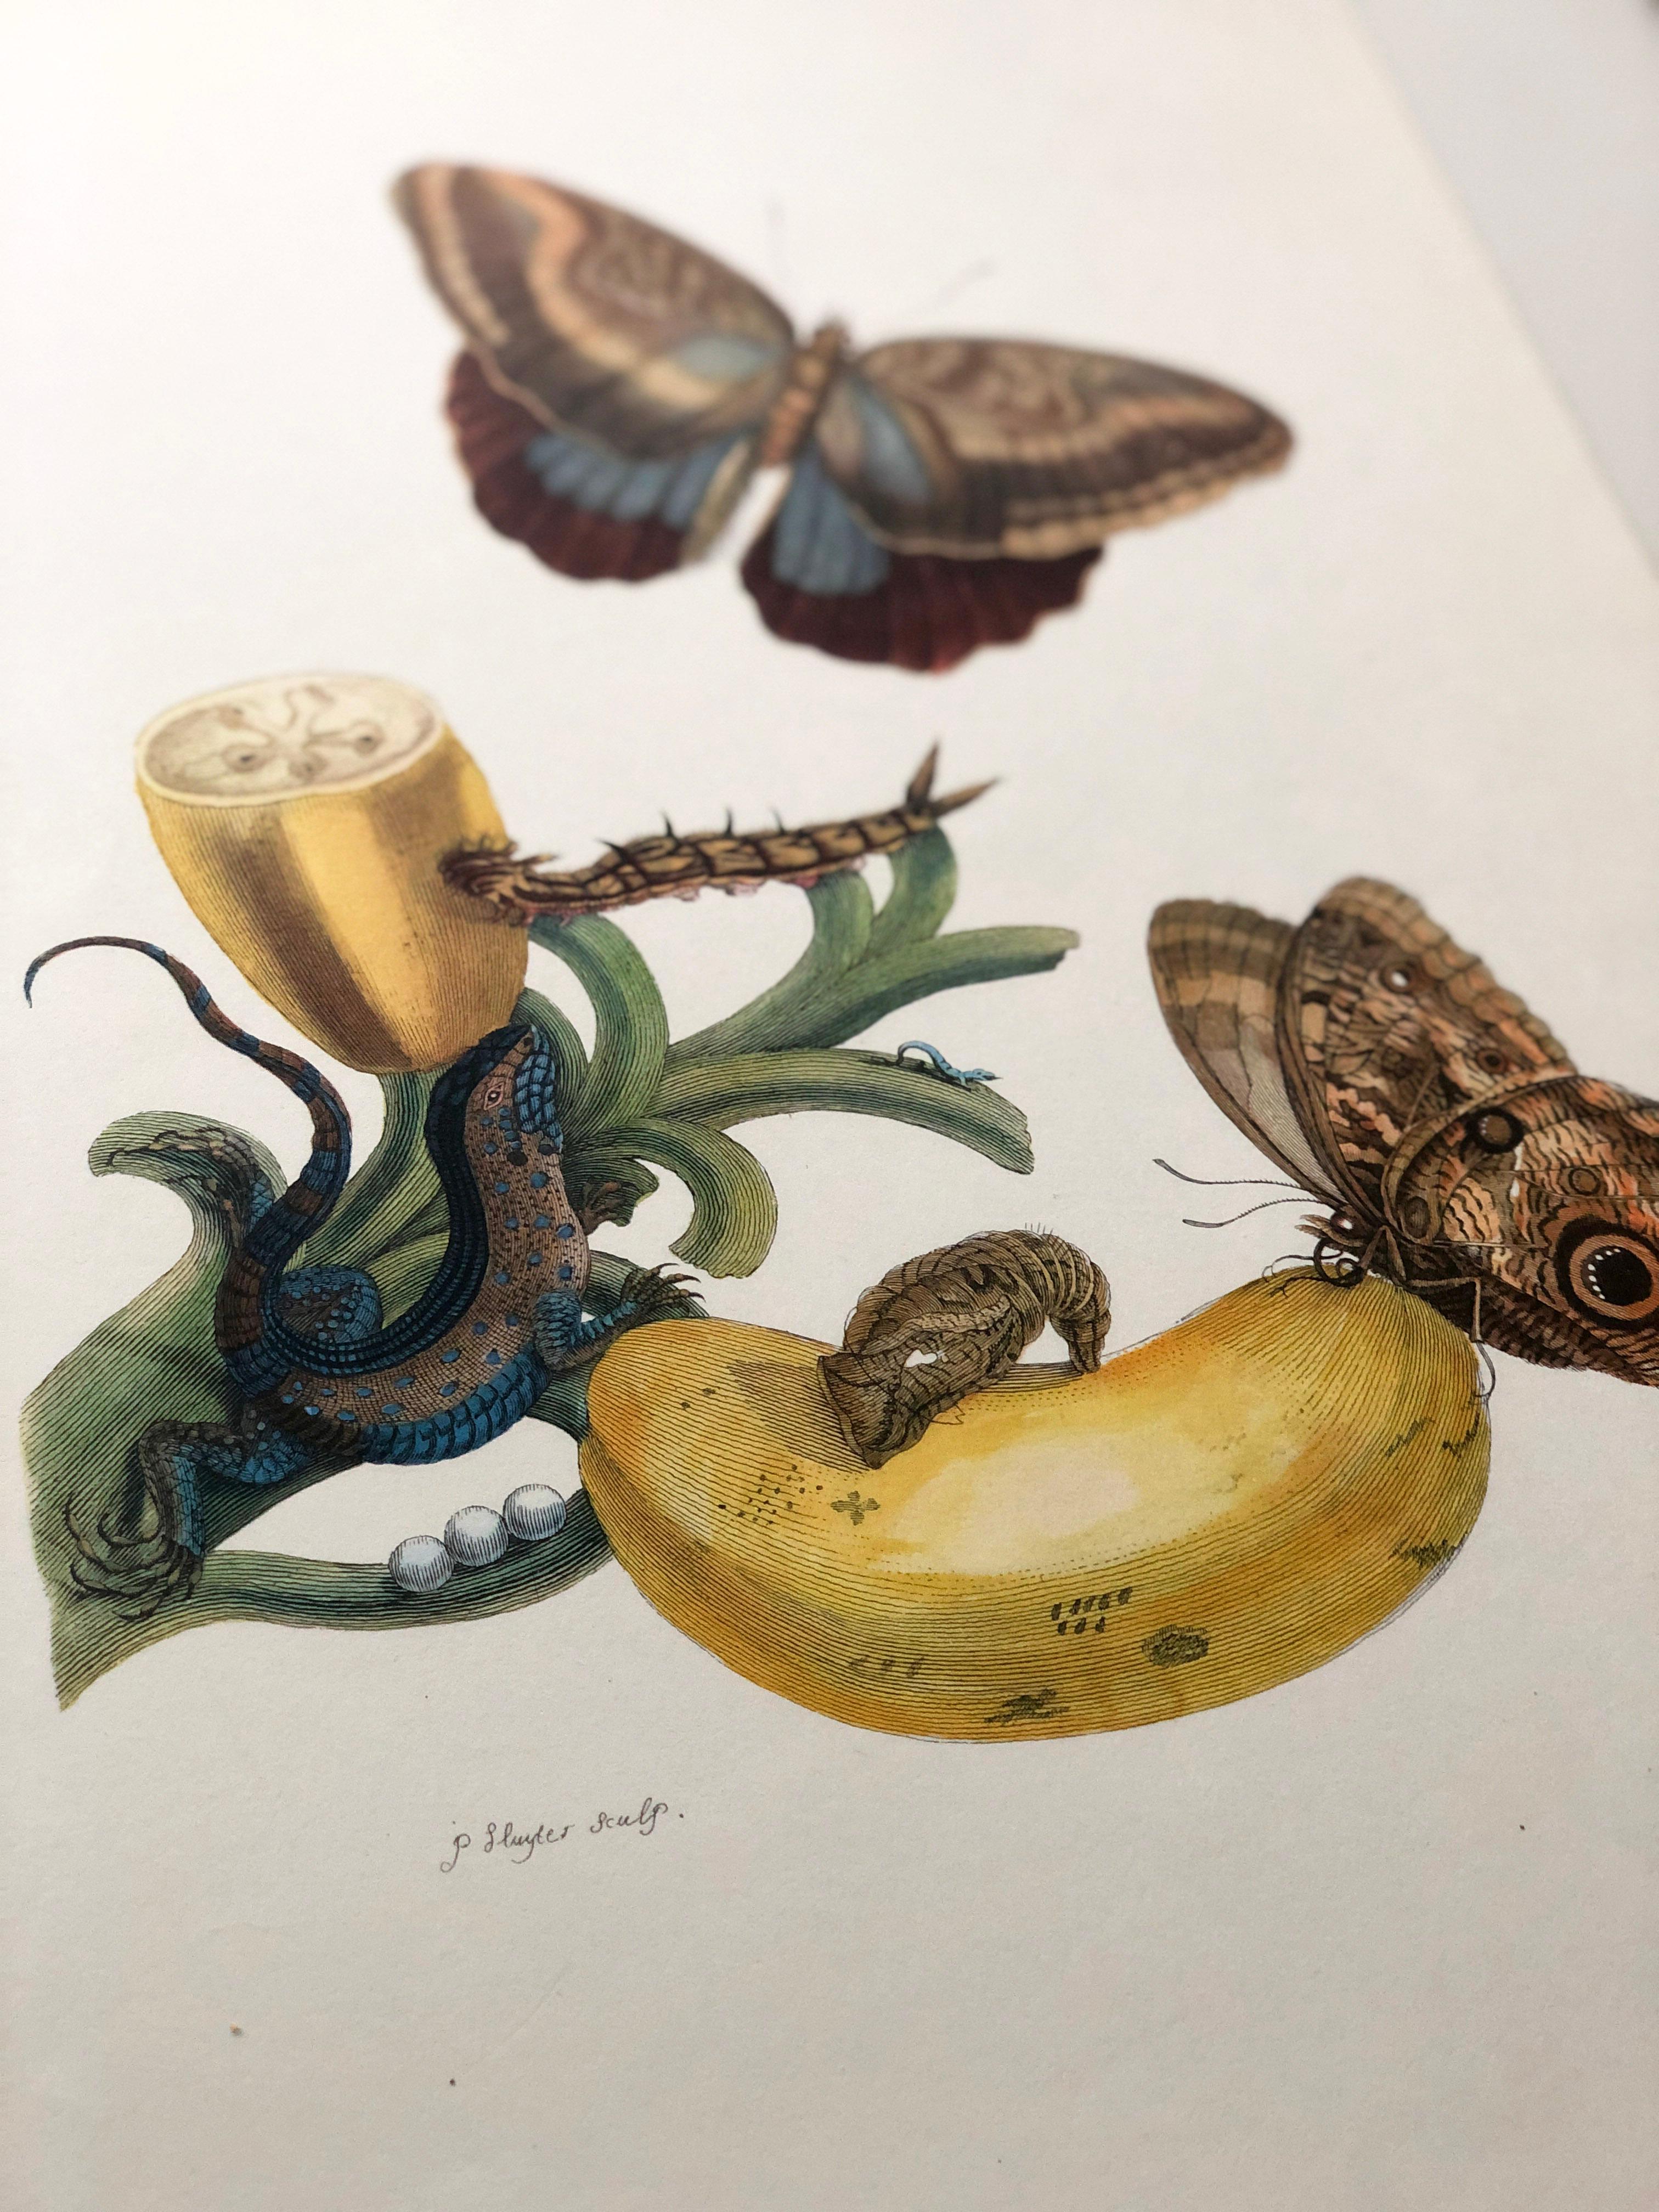 From Metamorphosis Insectorum Surinamensium, first published 1705
Engravings by J. Mulder, P. Sluyter (Sluiter) and D. Stoopendaal after Maria Sybilla Merian.

This plate is part of a comprehensive collection comprising 17 plates. Check out other